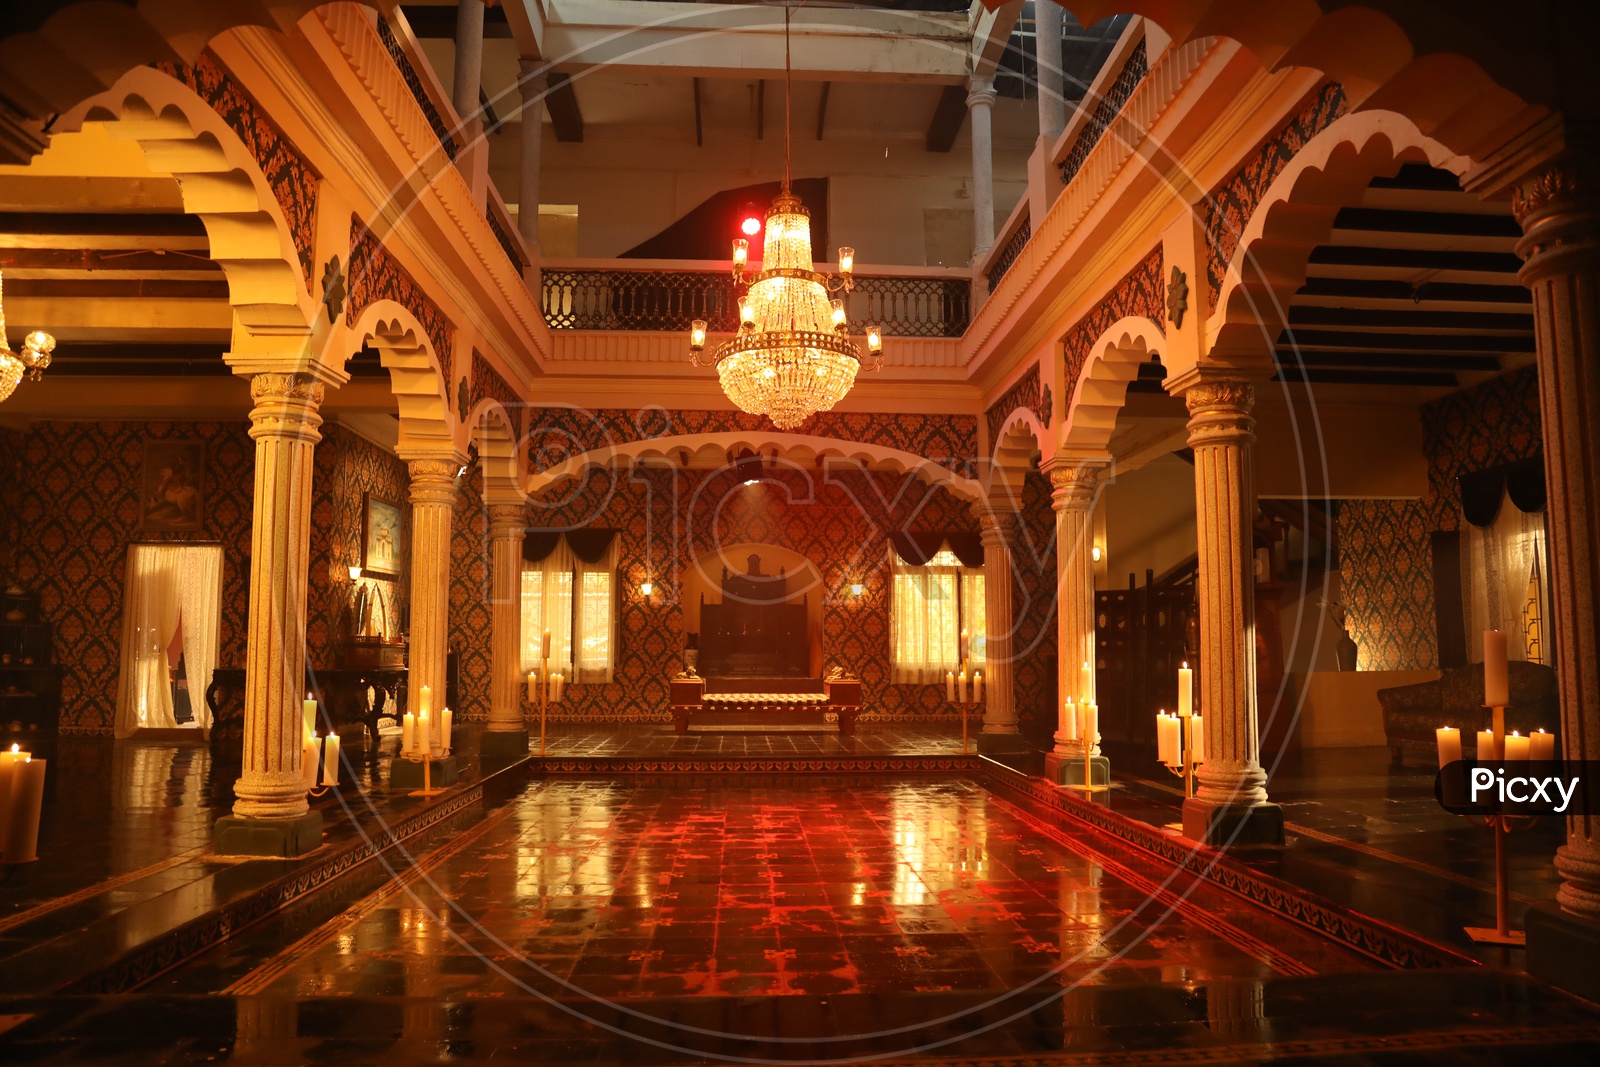 Royal Indian court set up with a Throne and chandelier